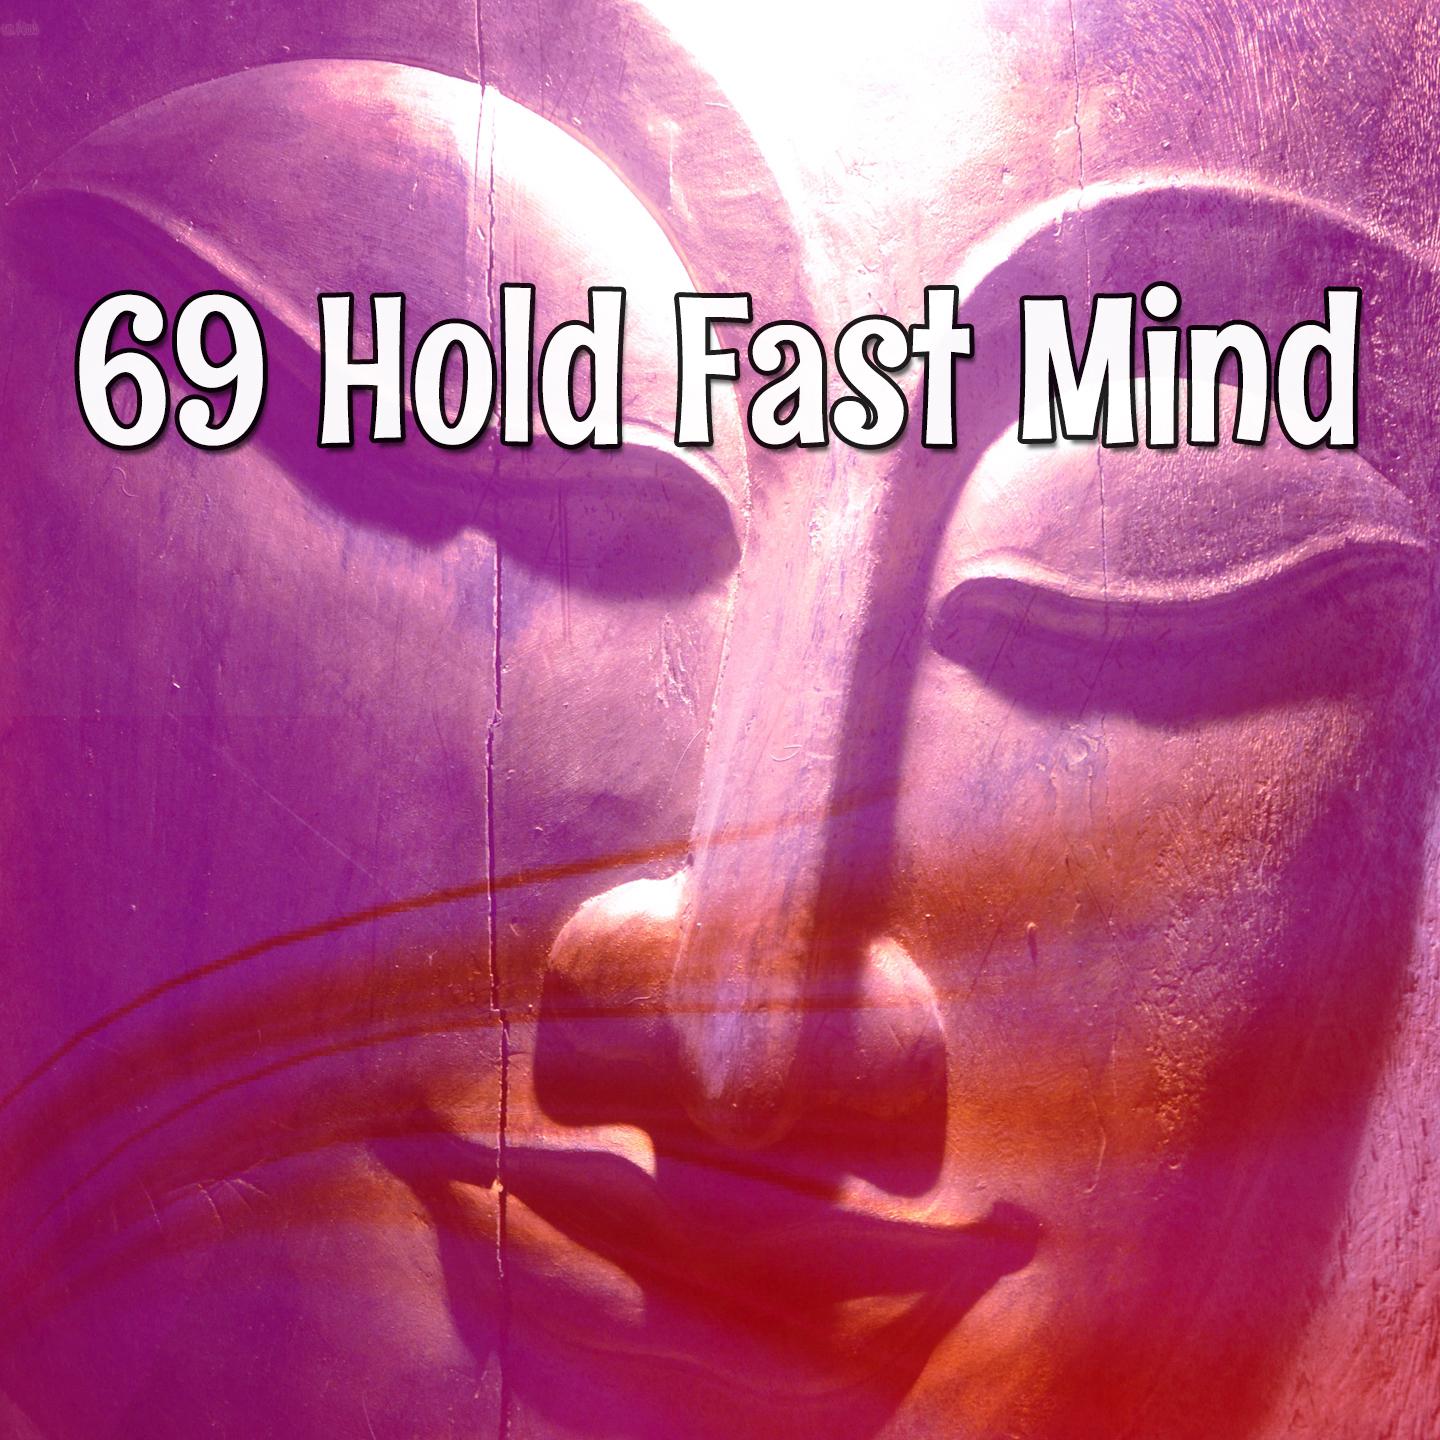 69 Hold Fast Mind